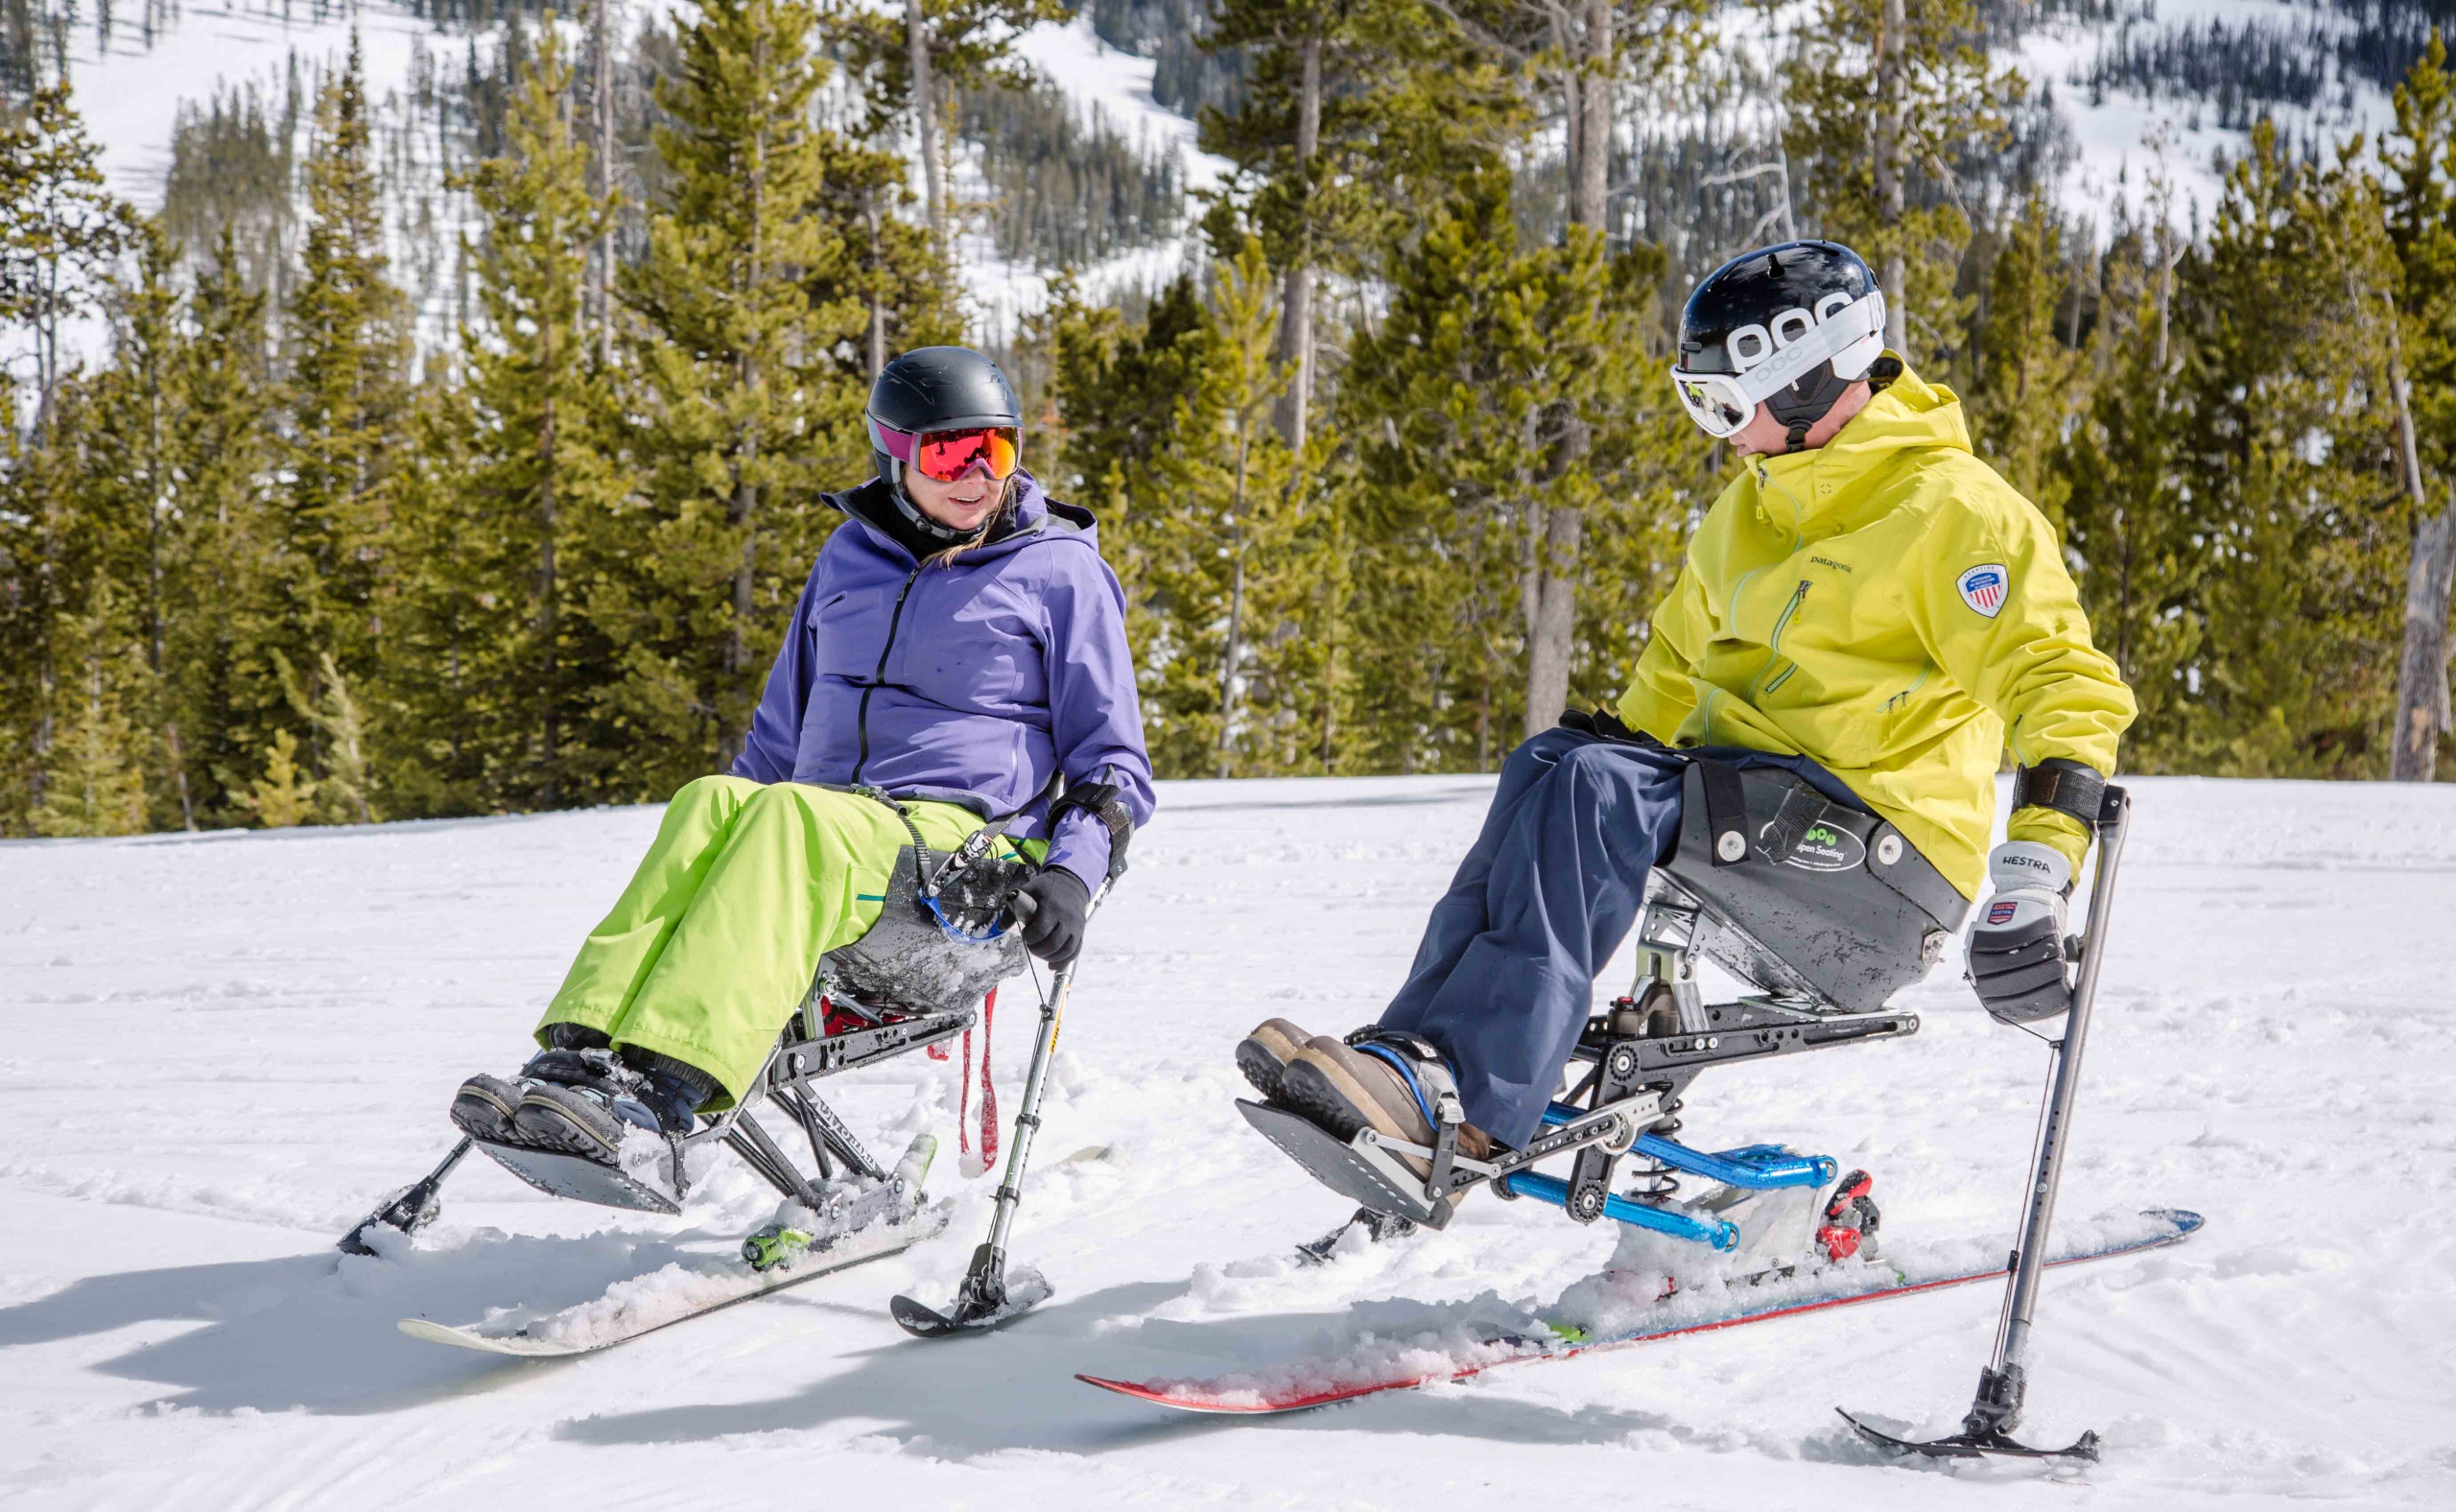 Katie Zinn and PSIA-AASI Adaptive Team Coach Geoff Krill talk while in their mono skis